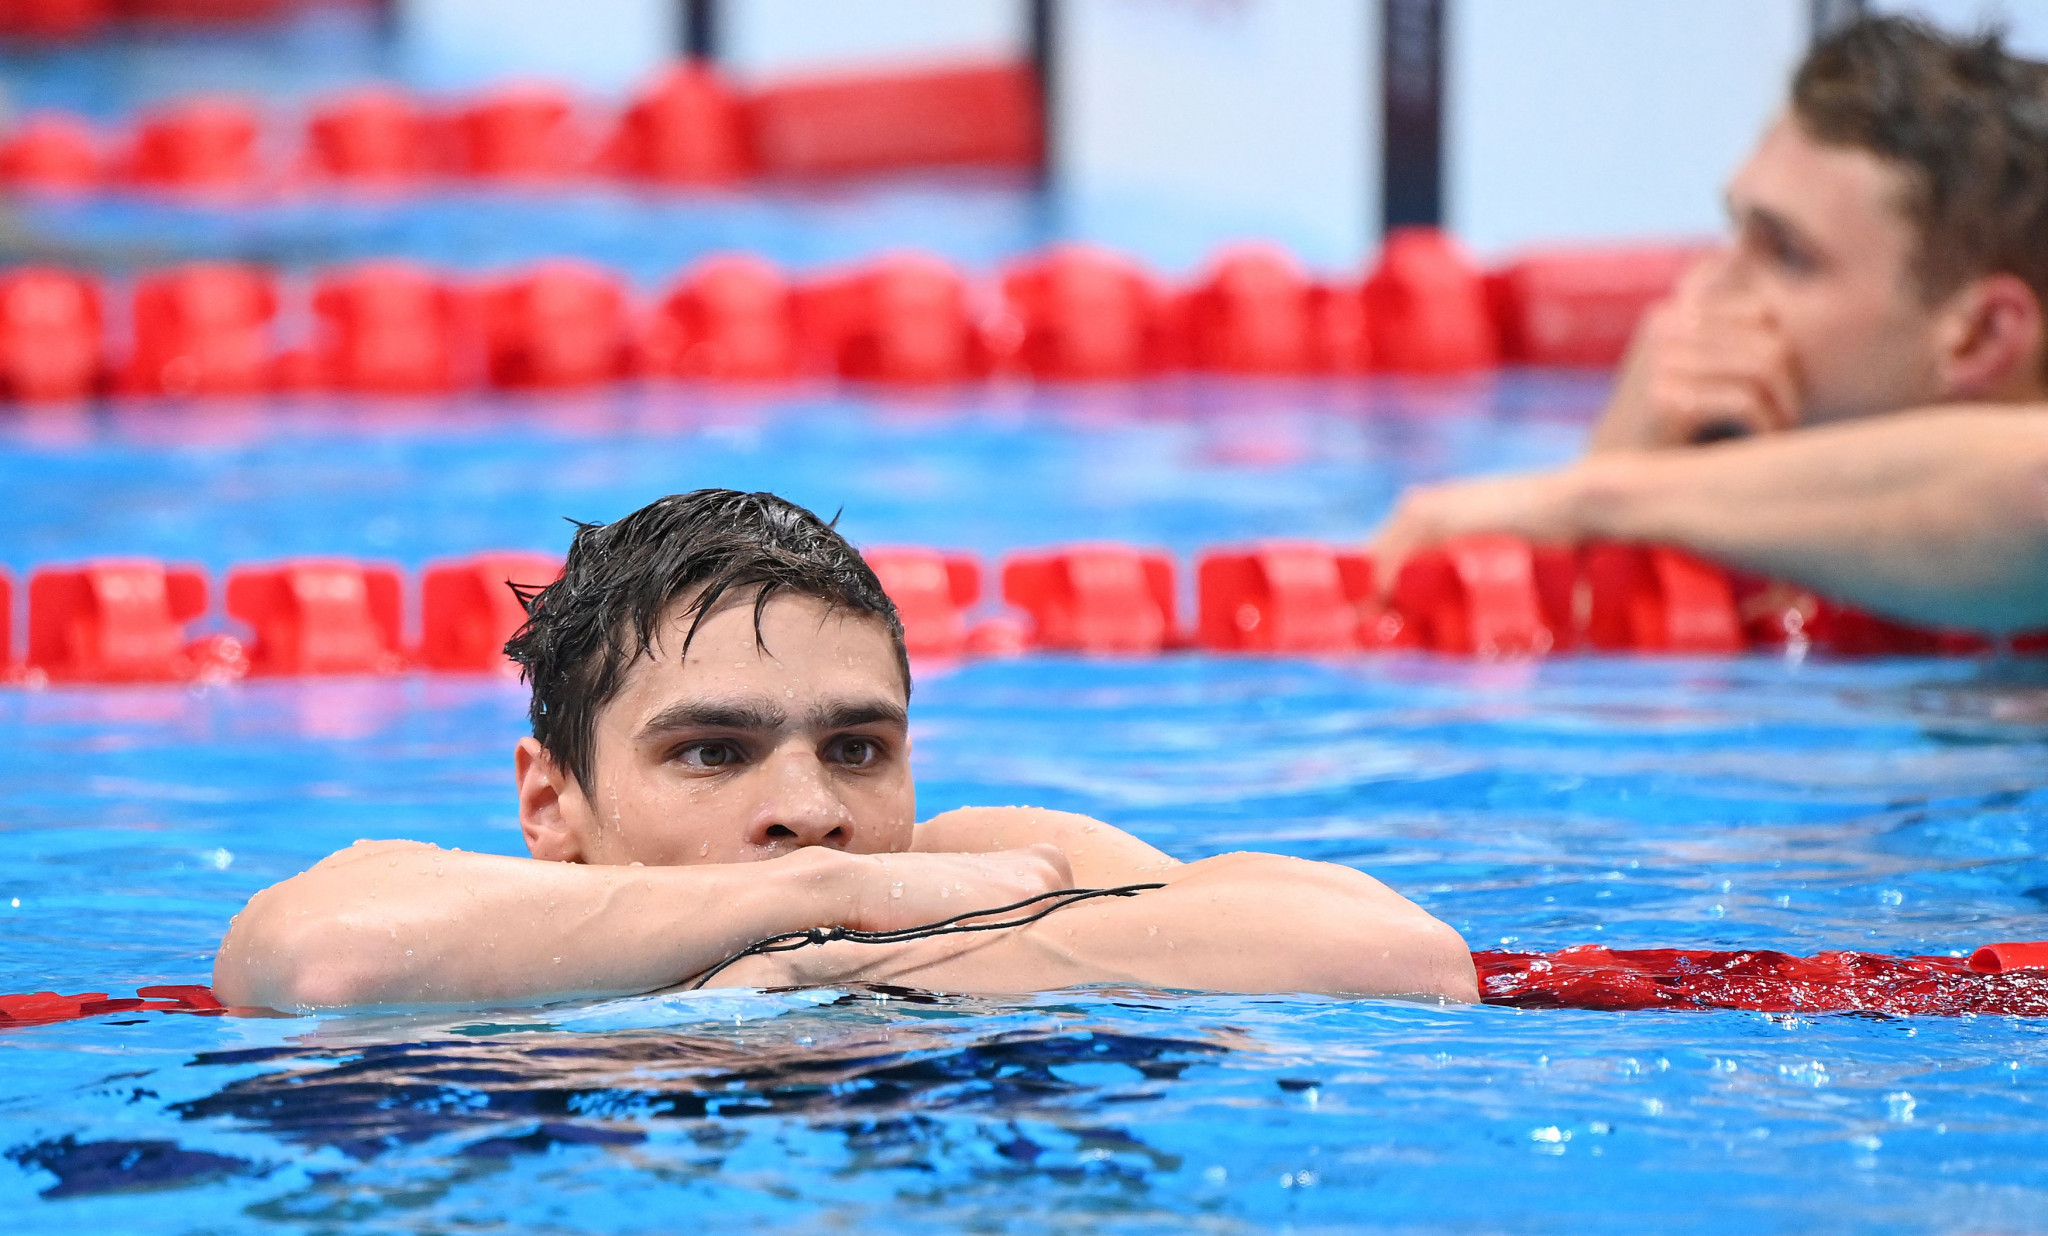 Evgeny Rylov competed at the Russian Swimming Championships after being banned for nine months by FINA ©Getty Images